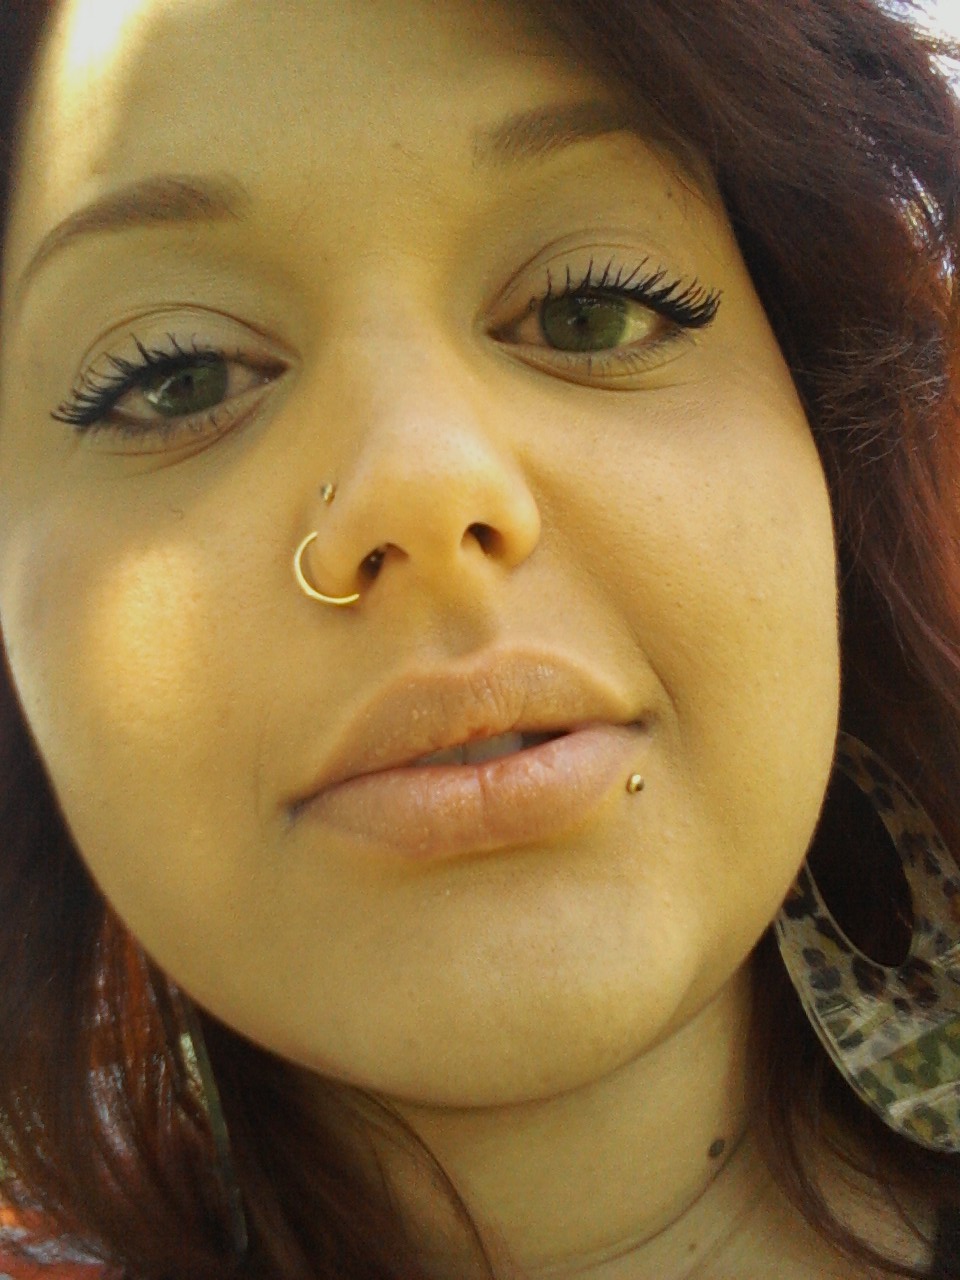 My Beauties - Nose and Lip Pierced